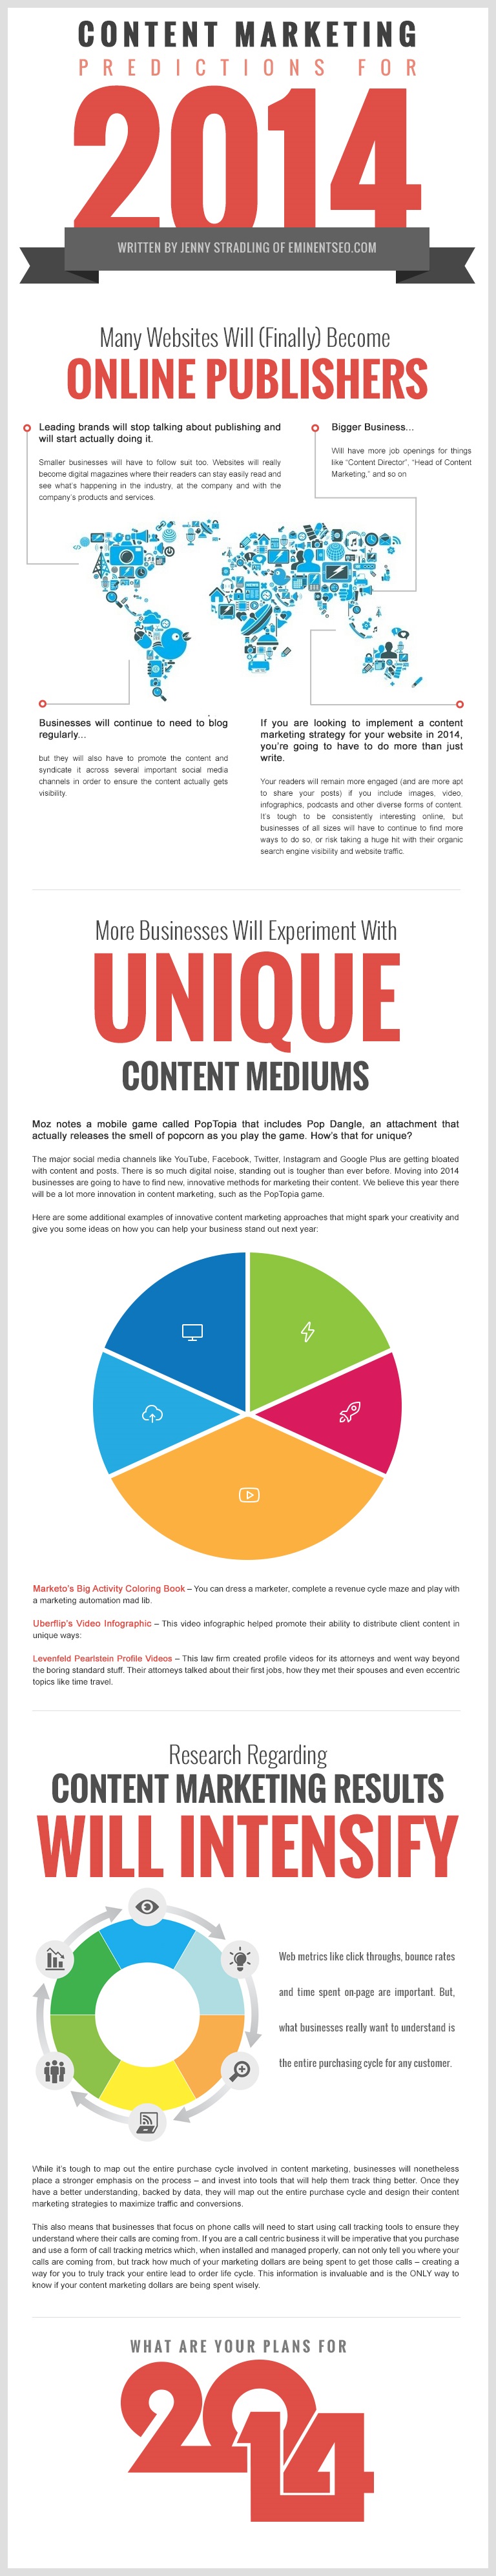 Content Marketing Predictions For 2014 Infographic